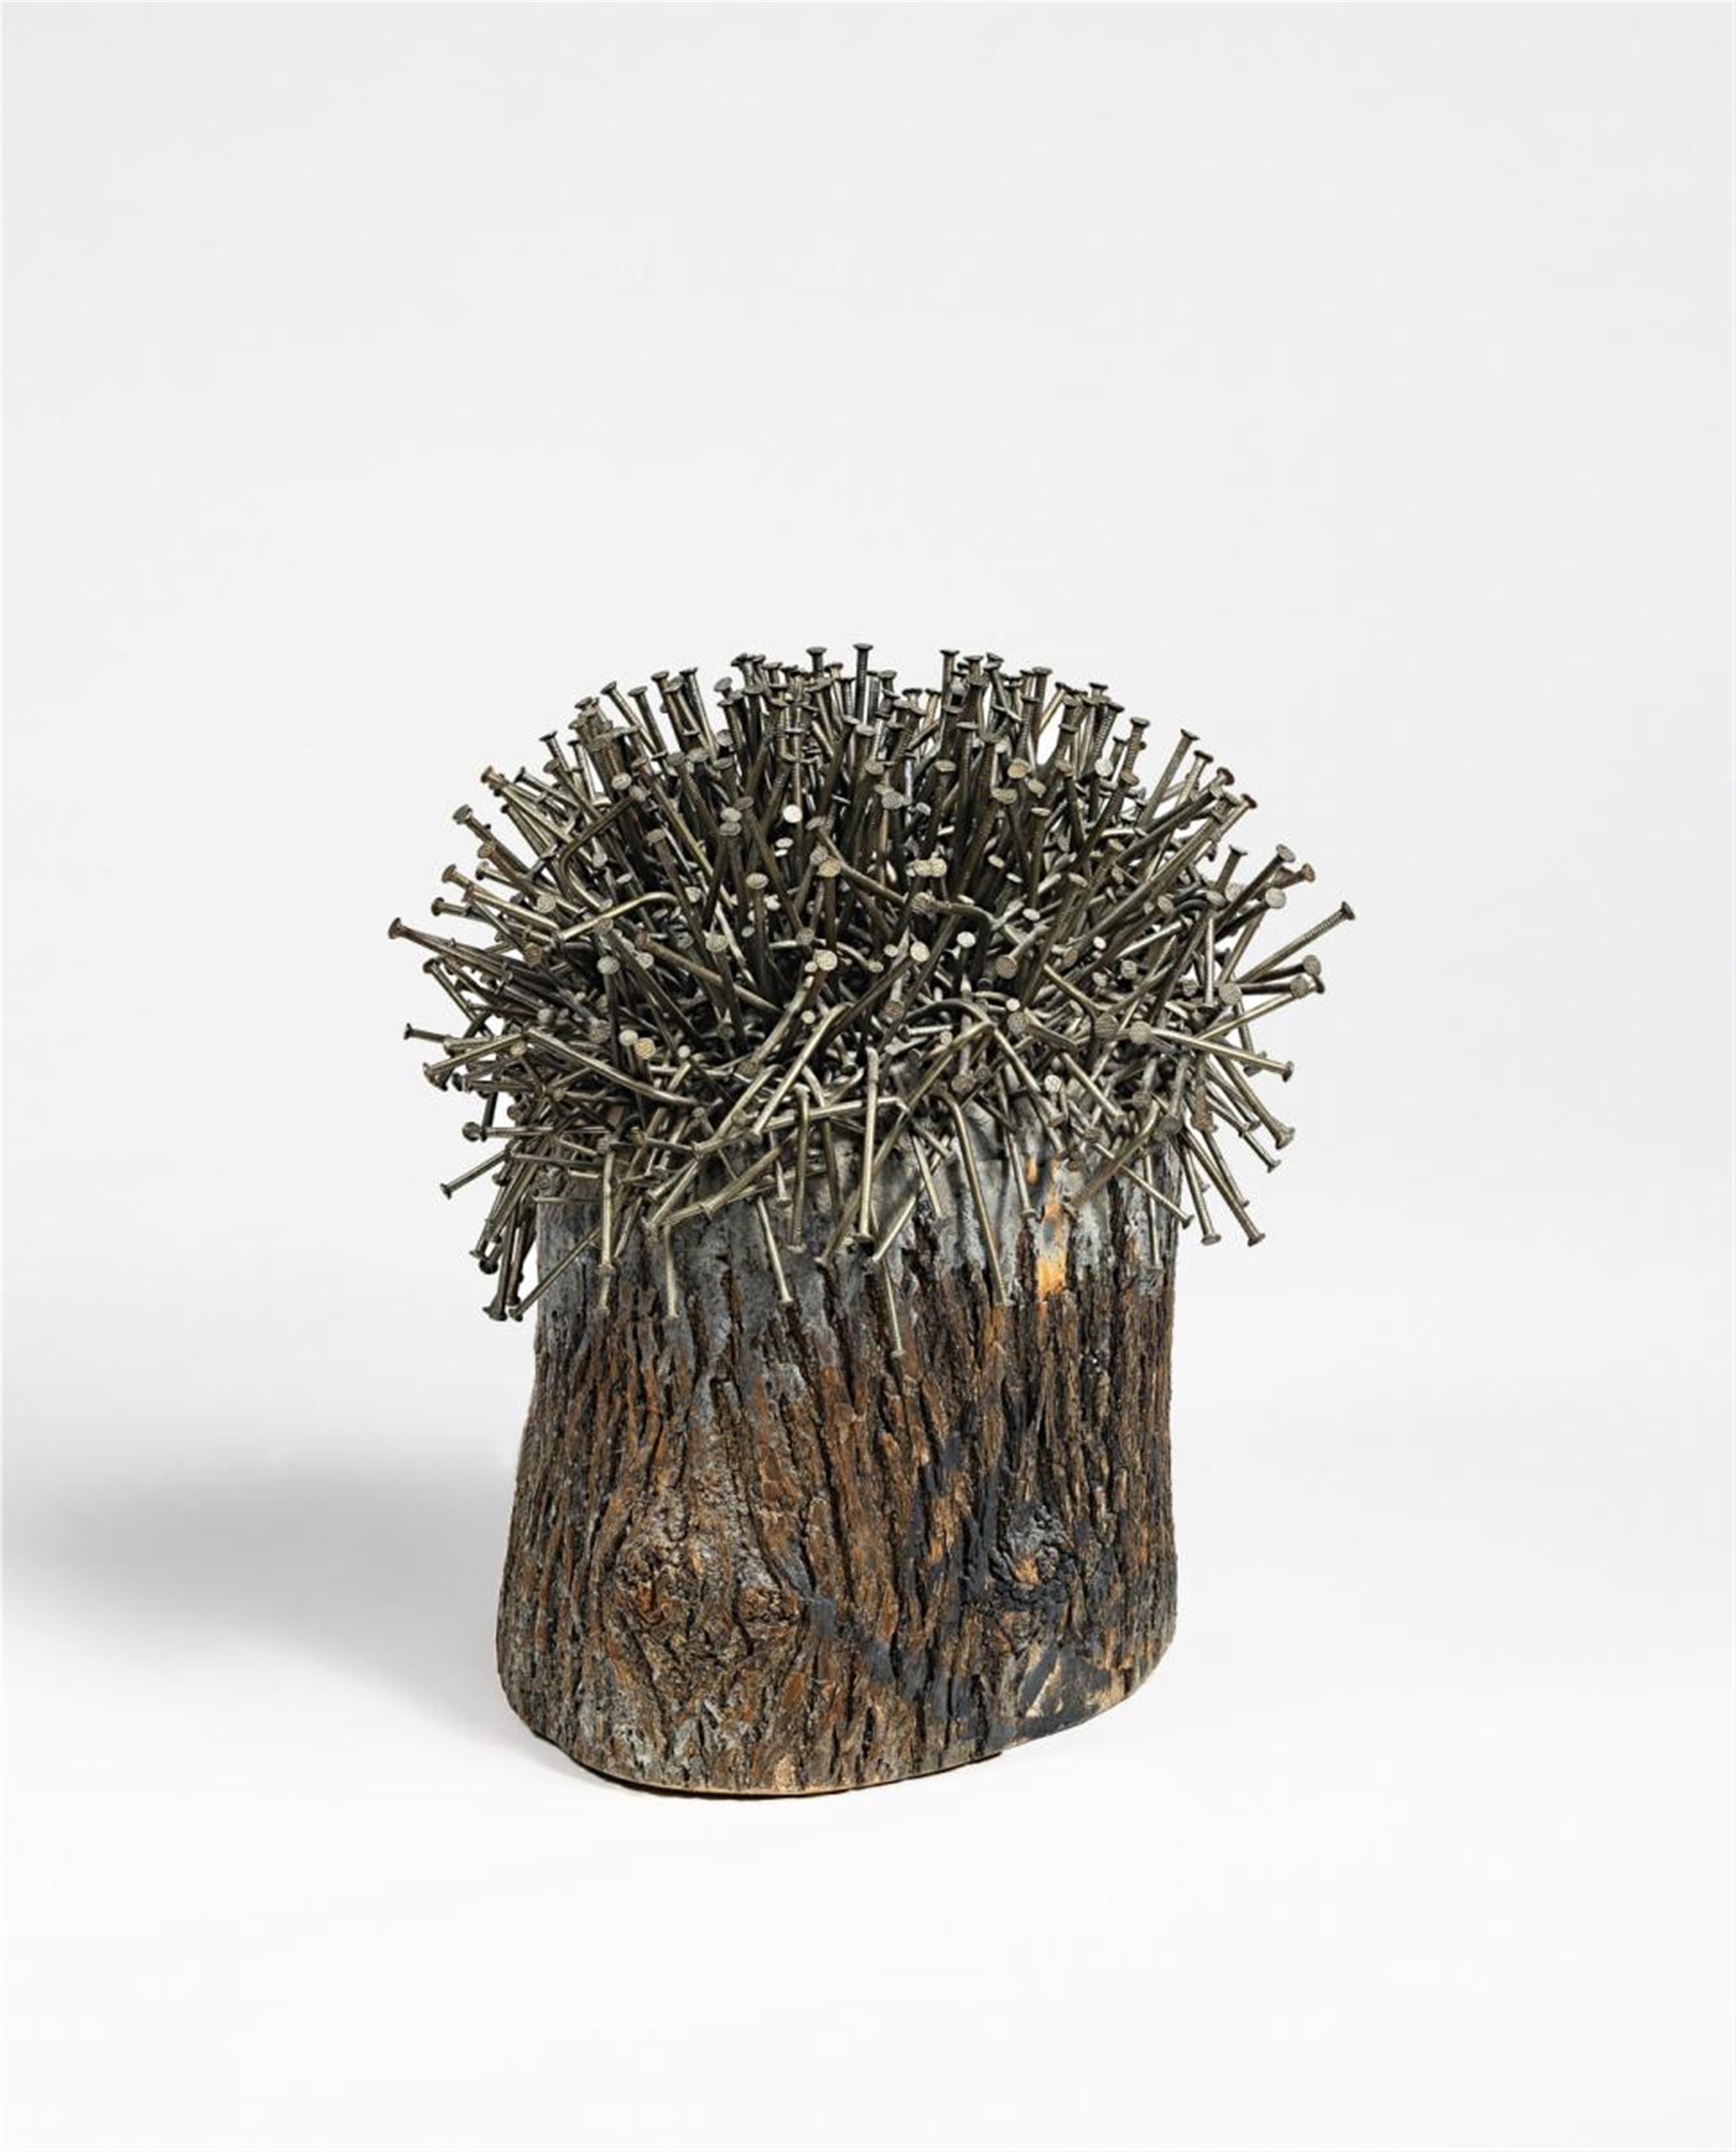 Günther Uecker - Untitled (nail tree) - image-1